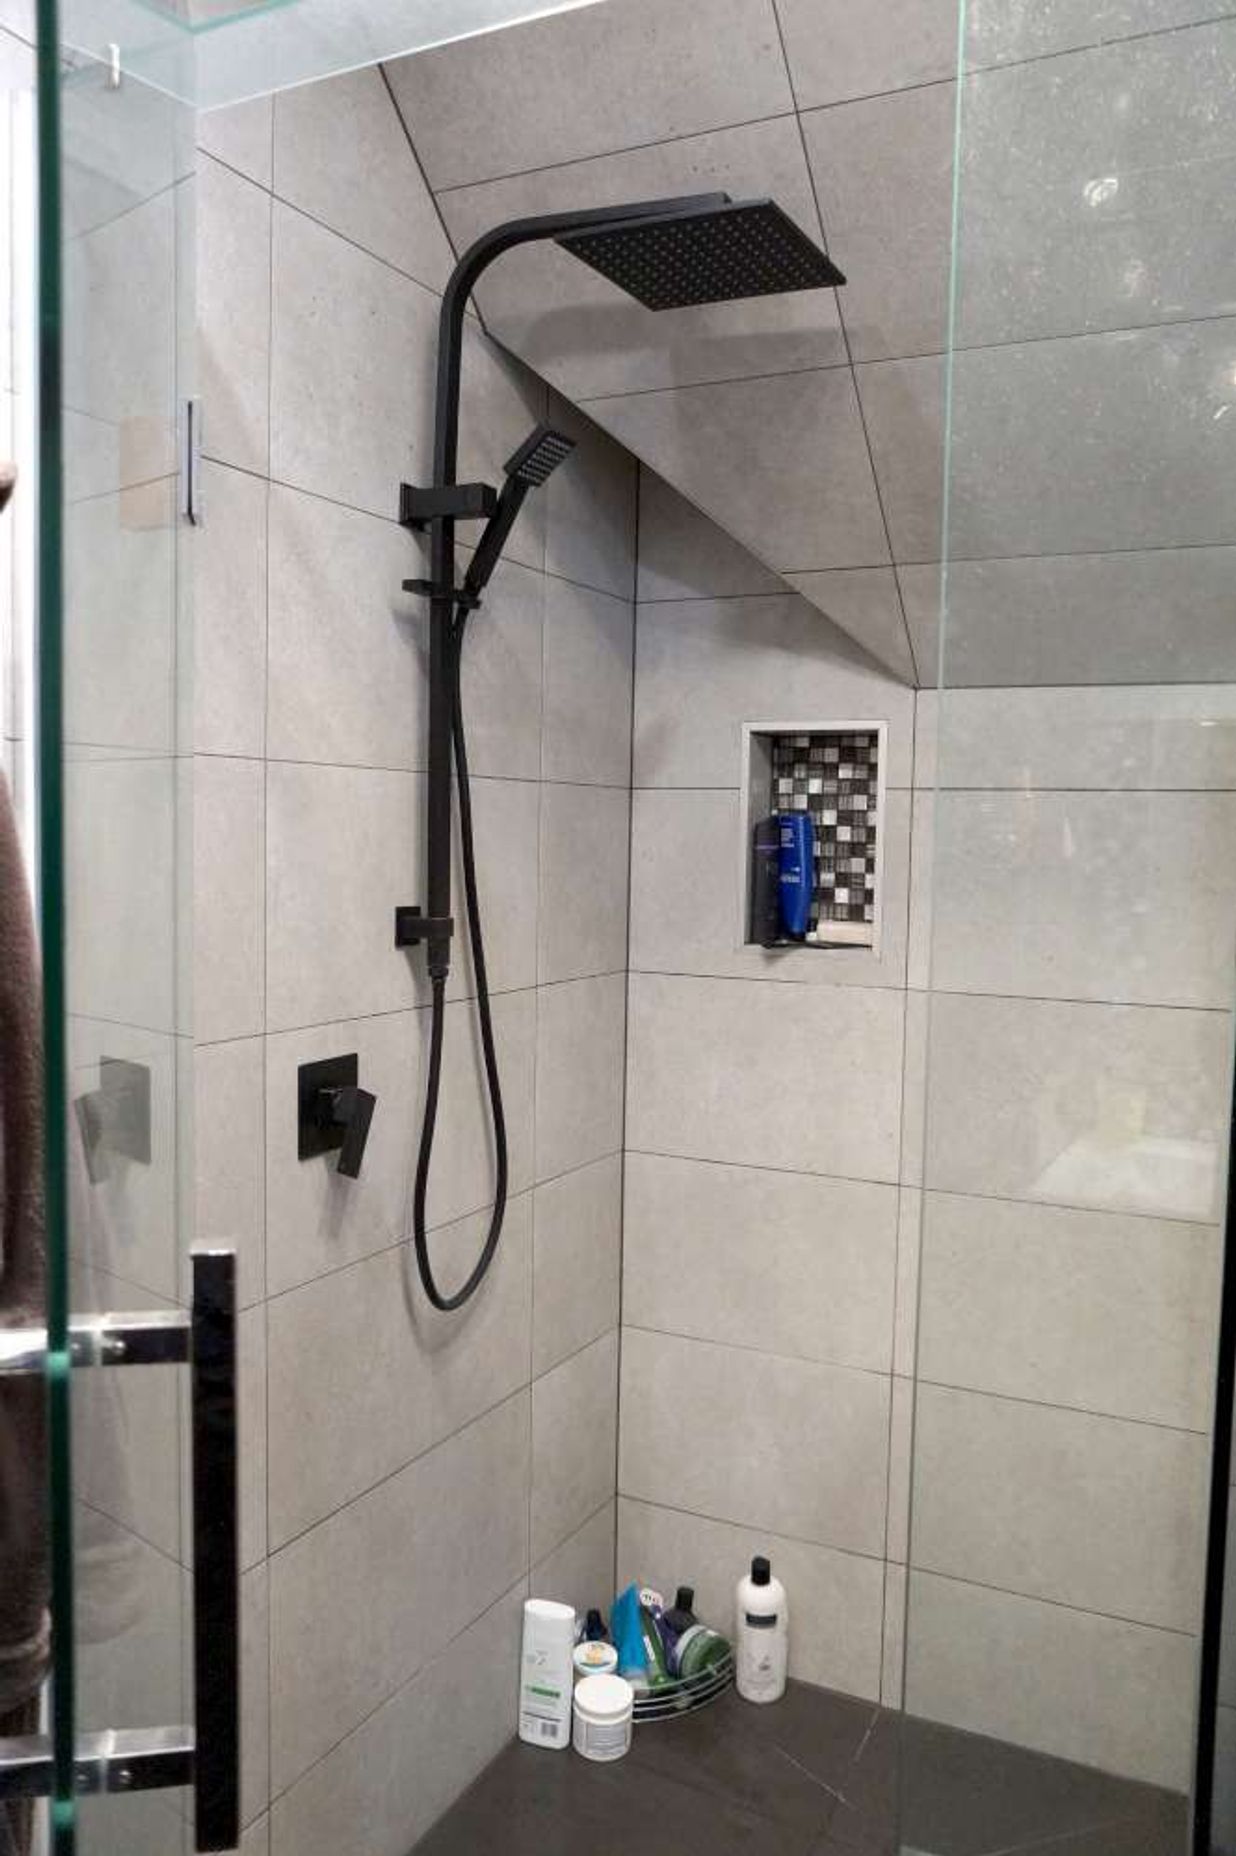 Bathroom renovation in Cockle Bay, Auckland. A shower niche was created in the wall of the tiled shower as a design feature.